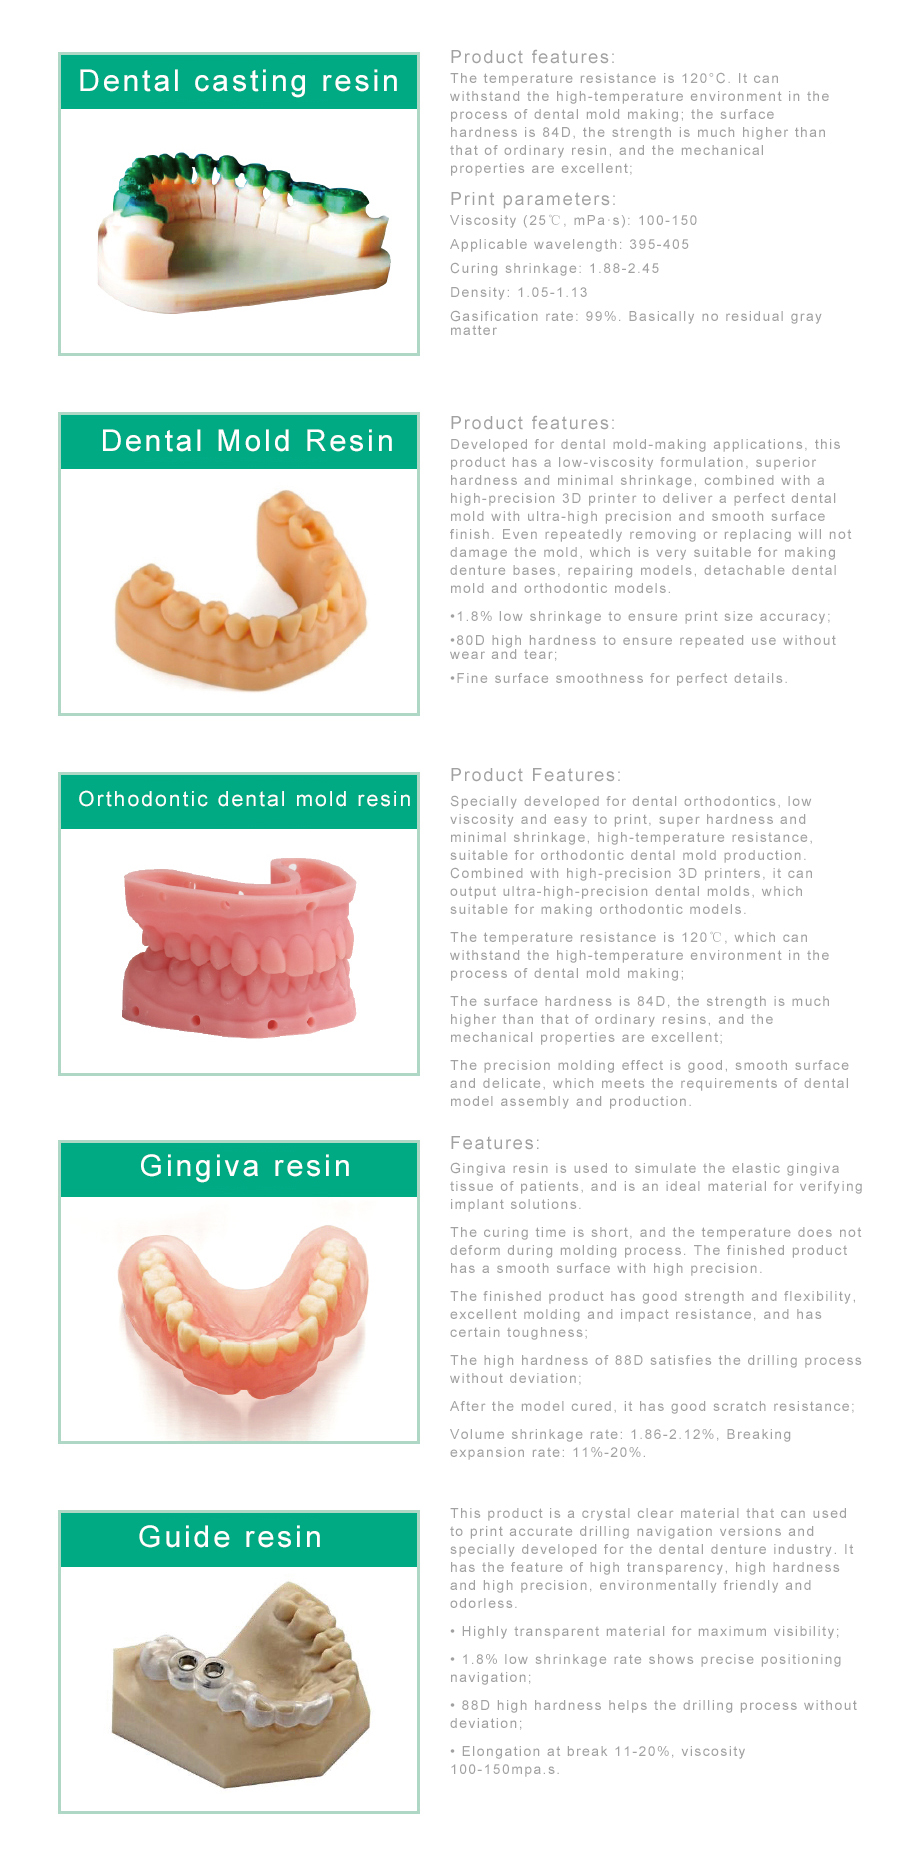 The application of 3D printing in dentistry